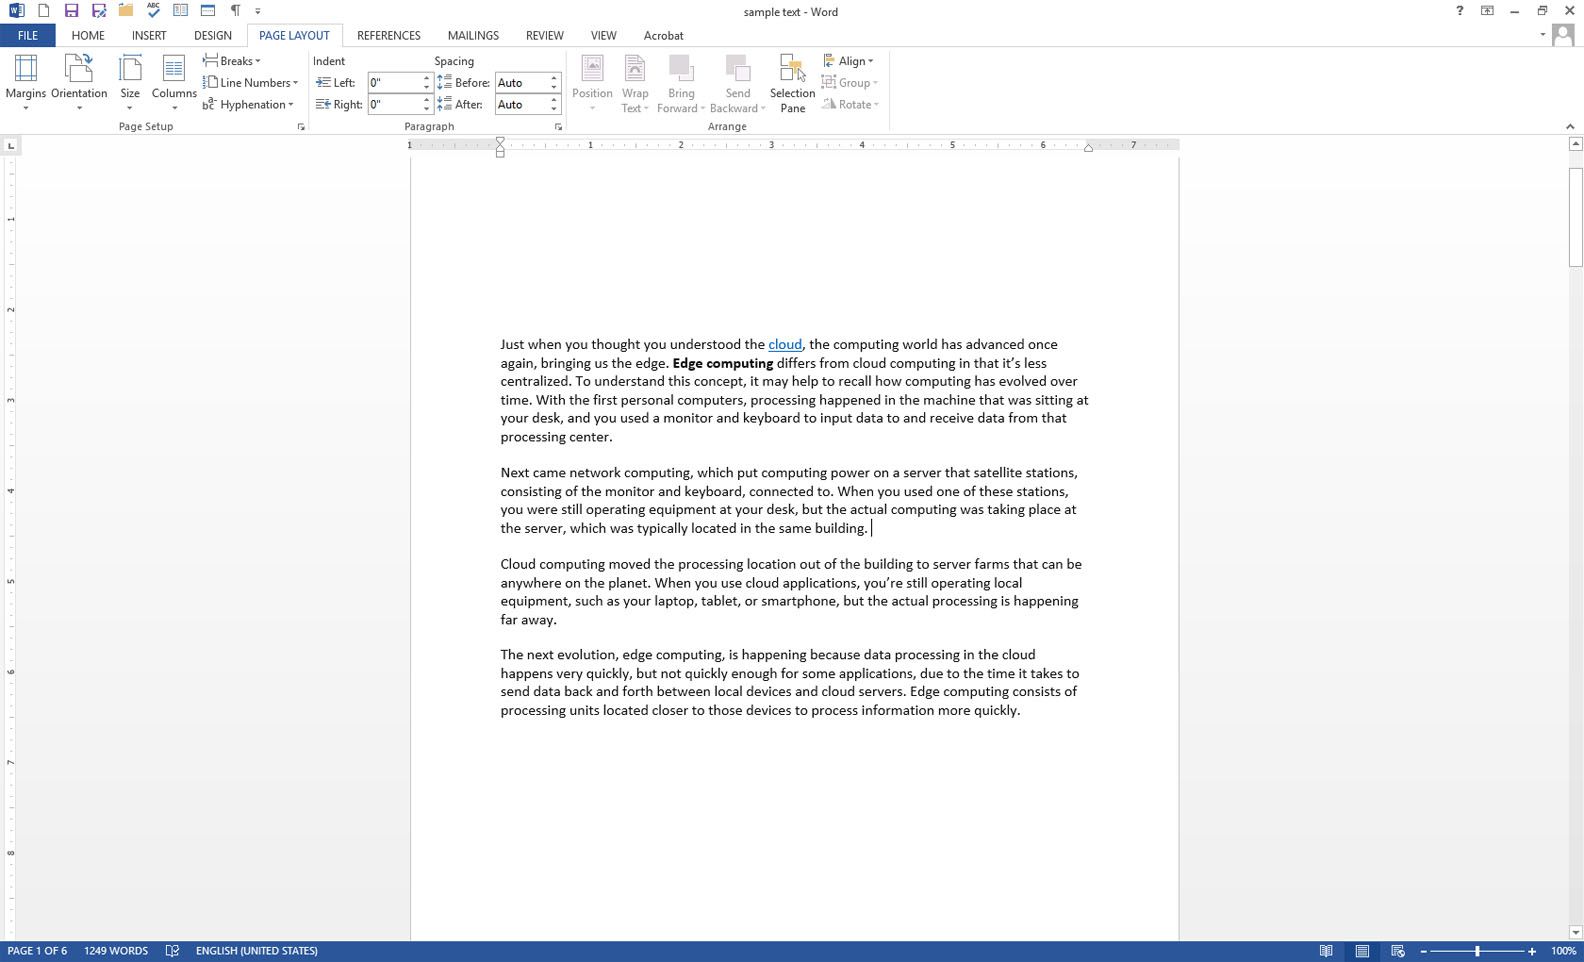 microsoft word center page alignment